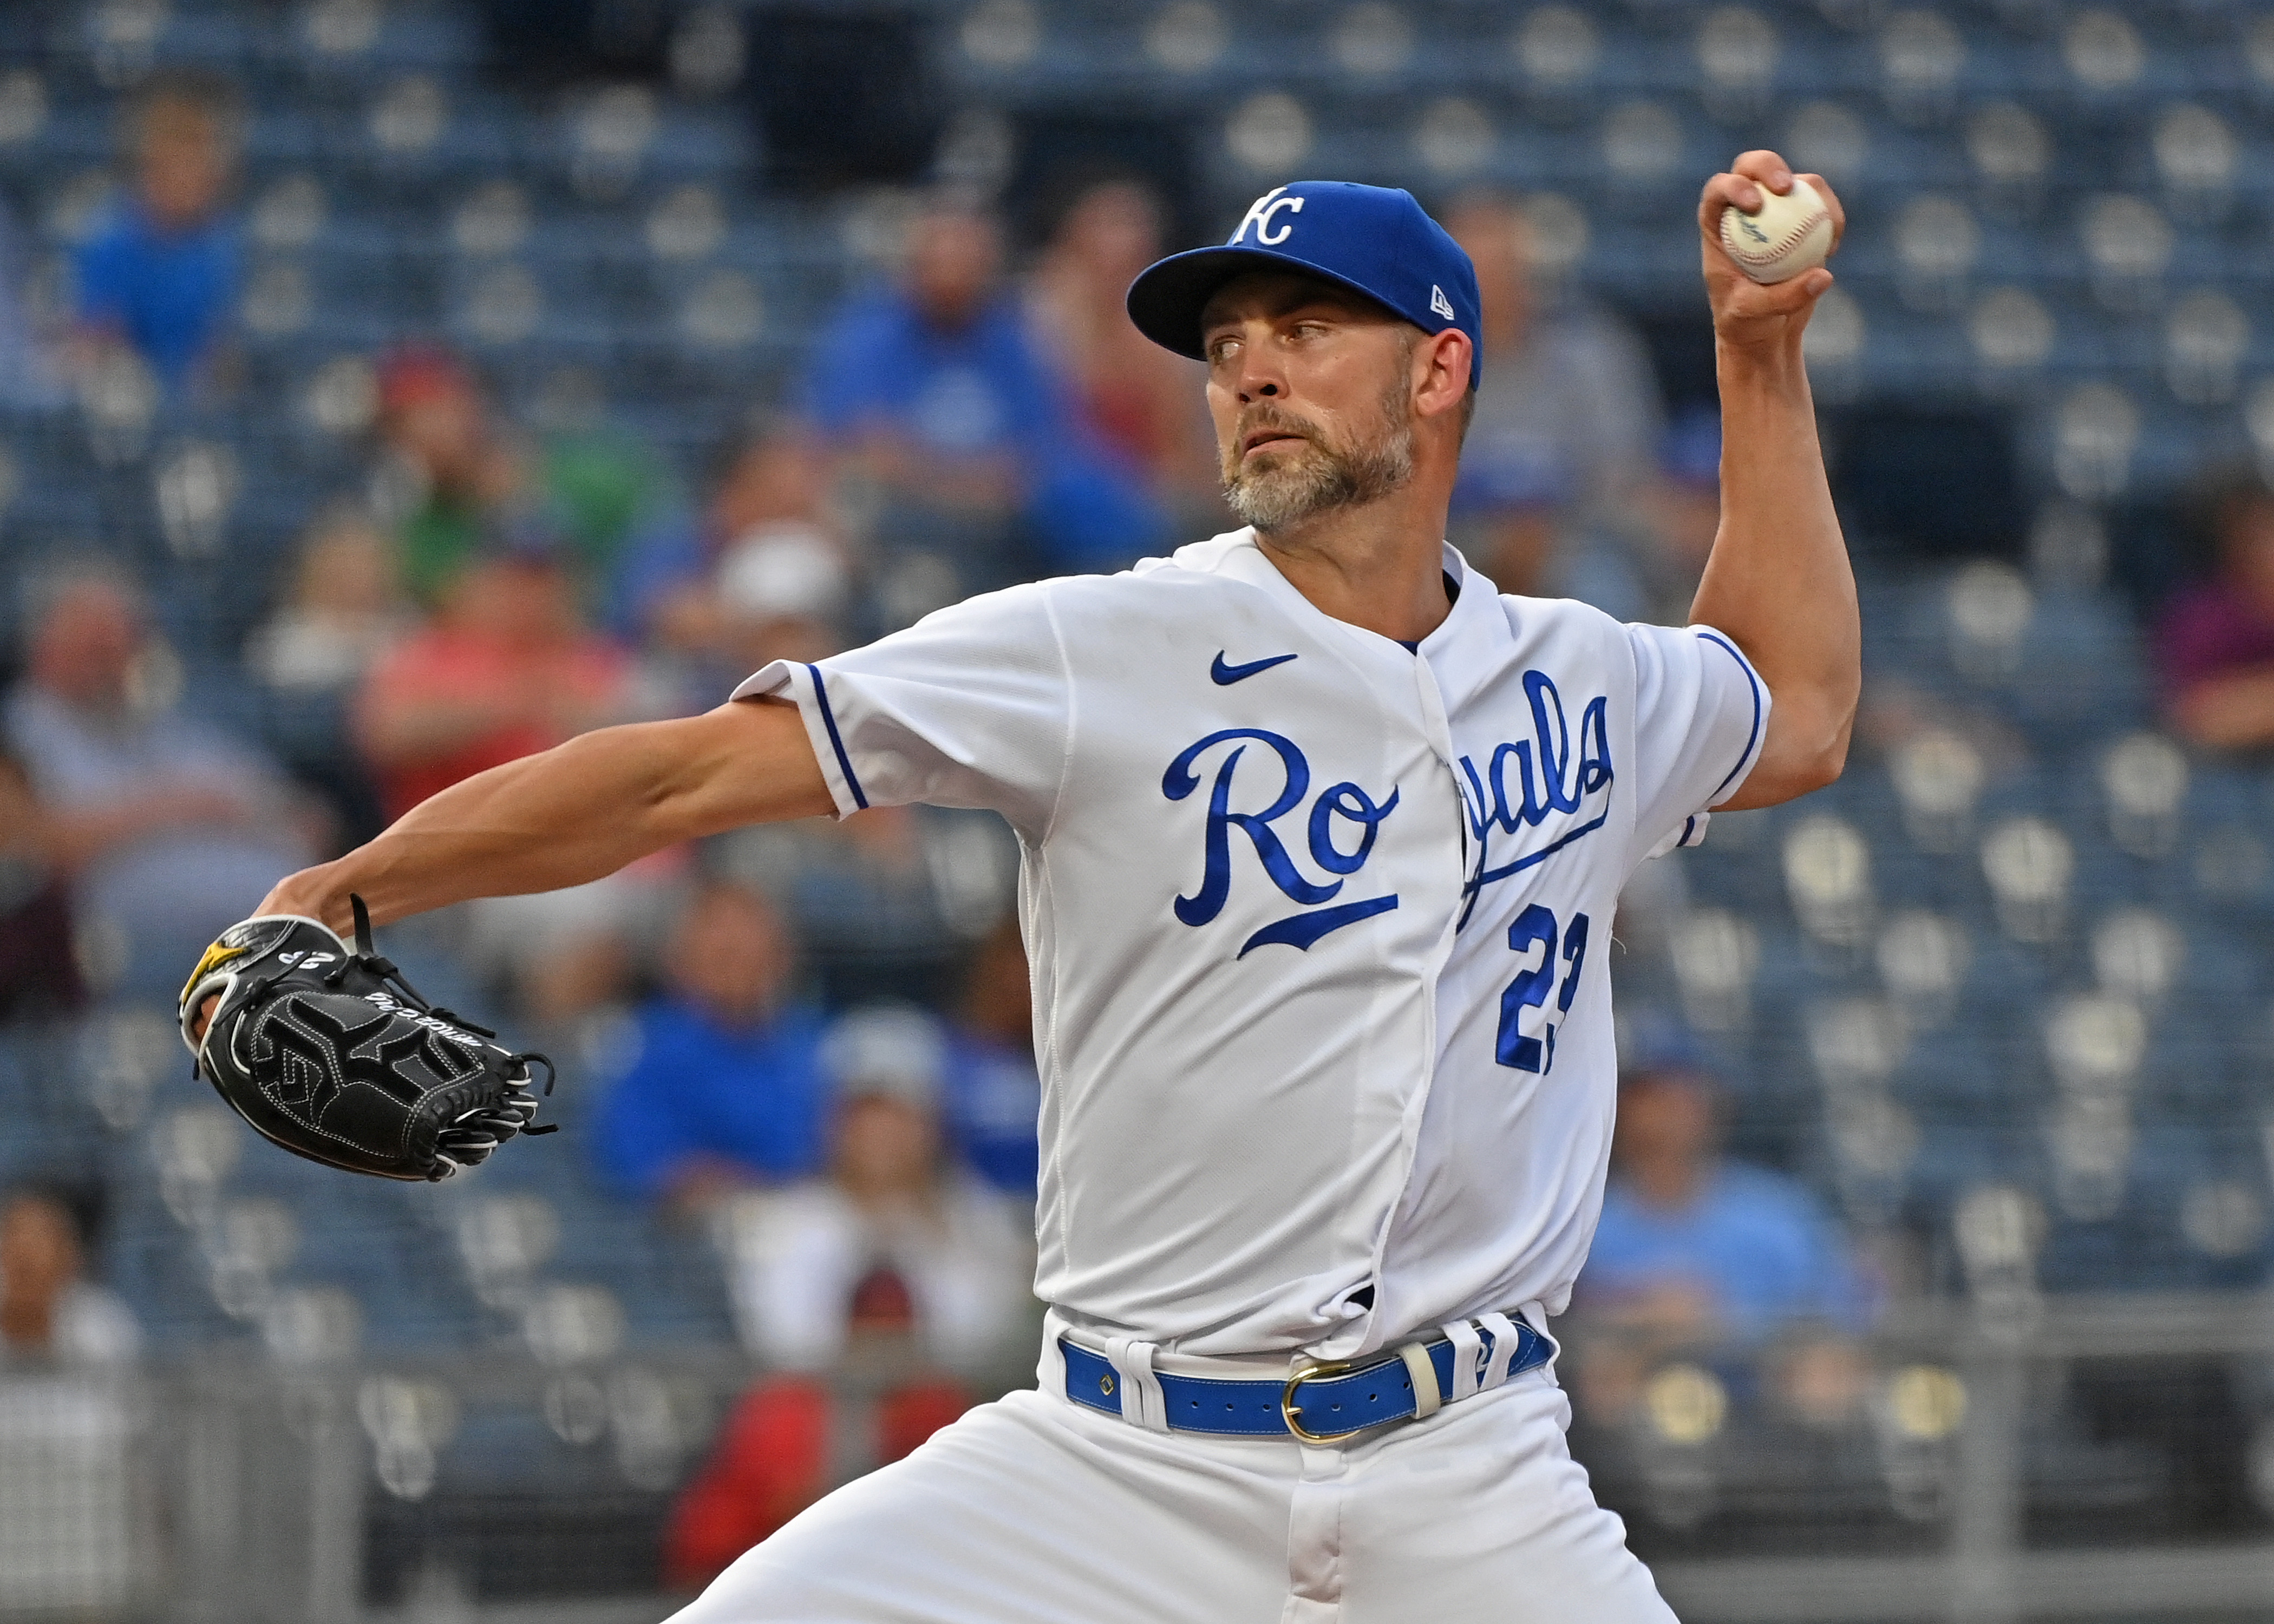 Kansas City Royals starting pitcher Mike Minor (23) delivers a pitch during the first inning against the Cleveland Indians at Kauffman Stadium.